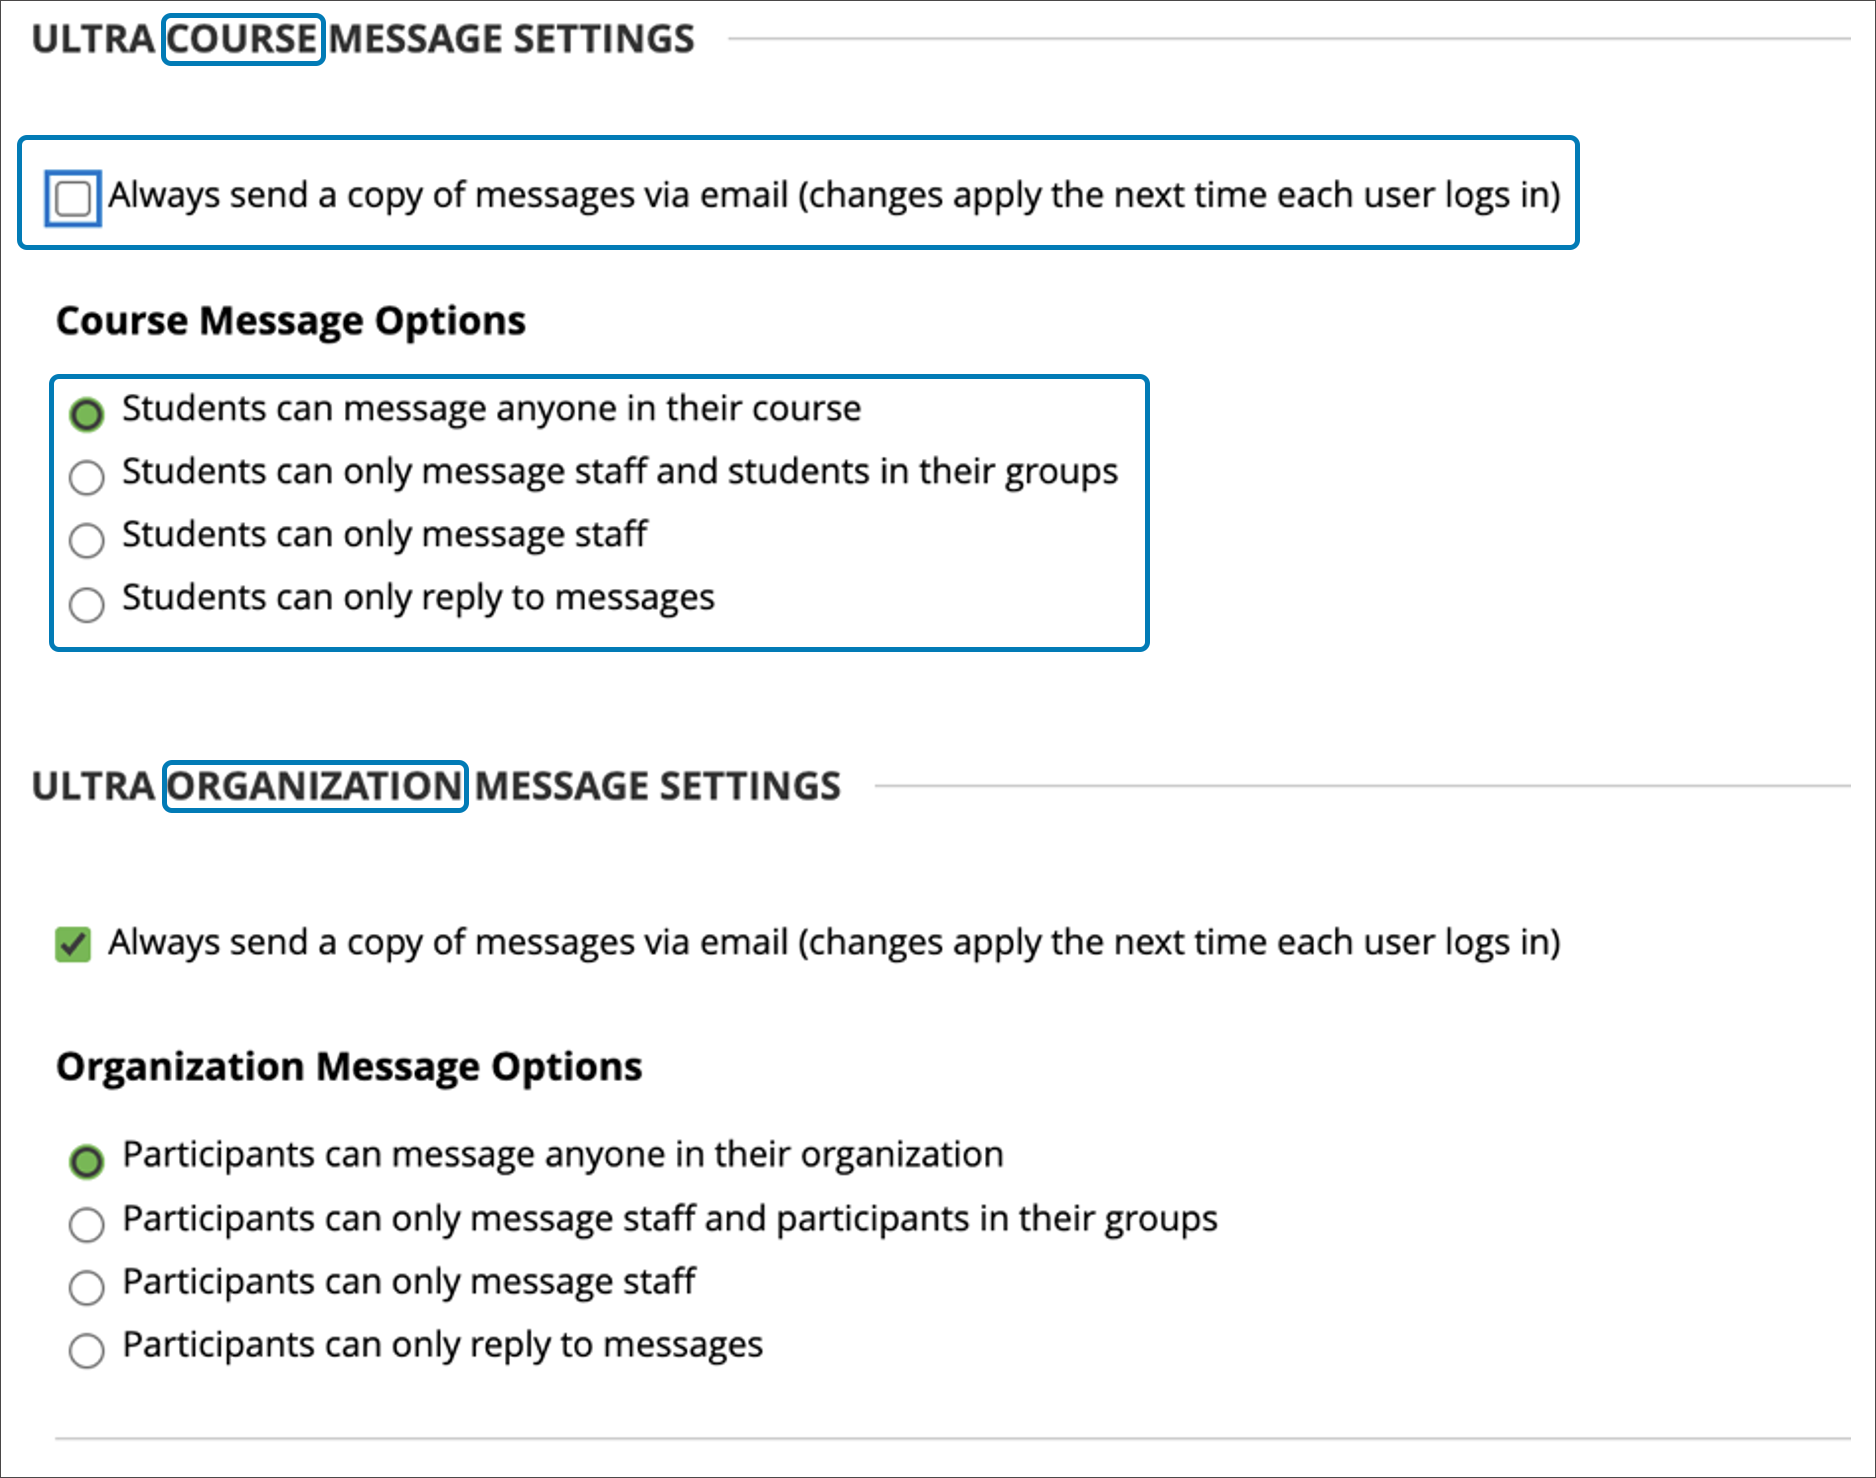 Administrator’s view of Ultra Course Message Settings